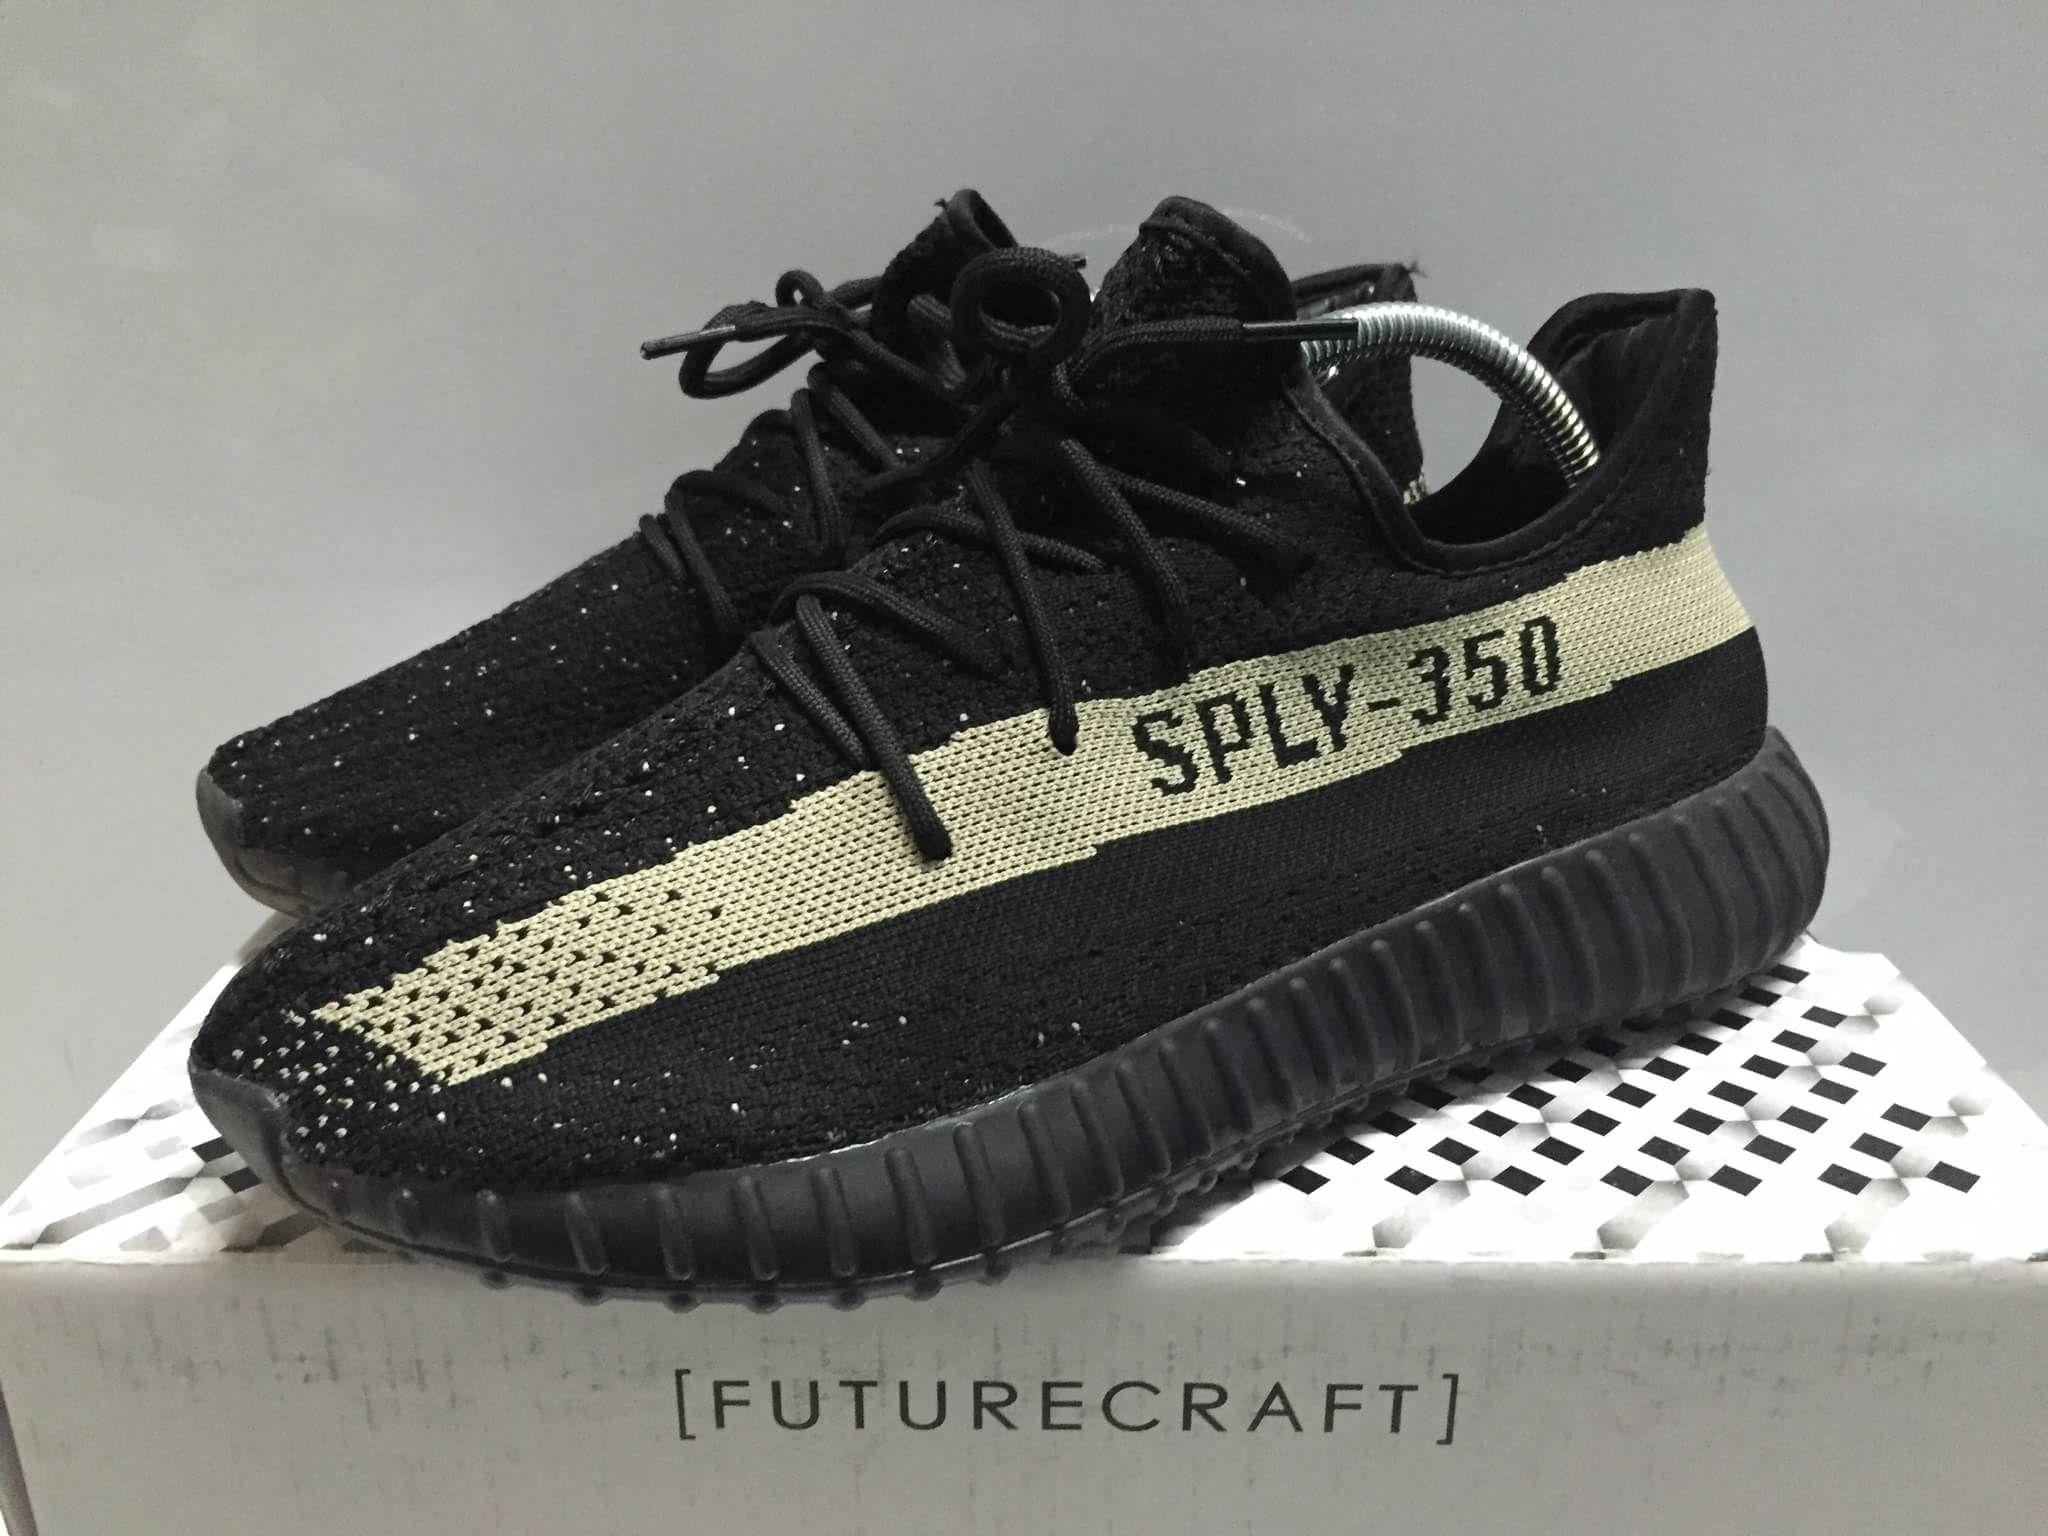 The Best UA II Adidas Yeezy Boost 350 V2 Black Red Black Shoes For